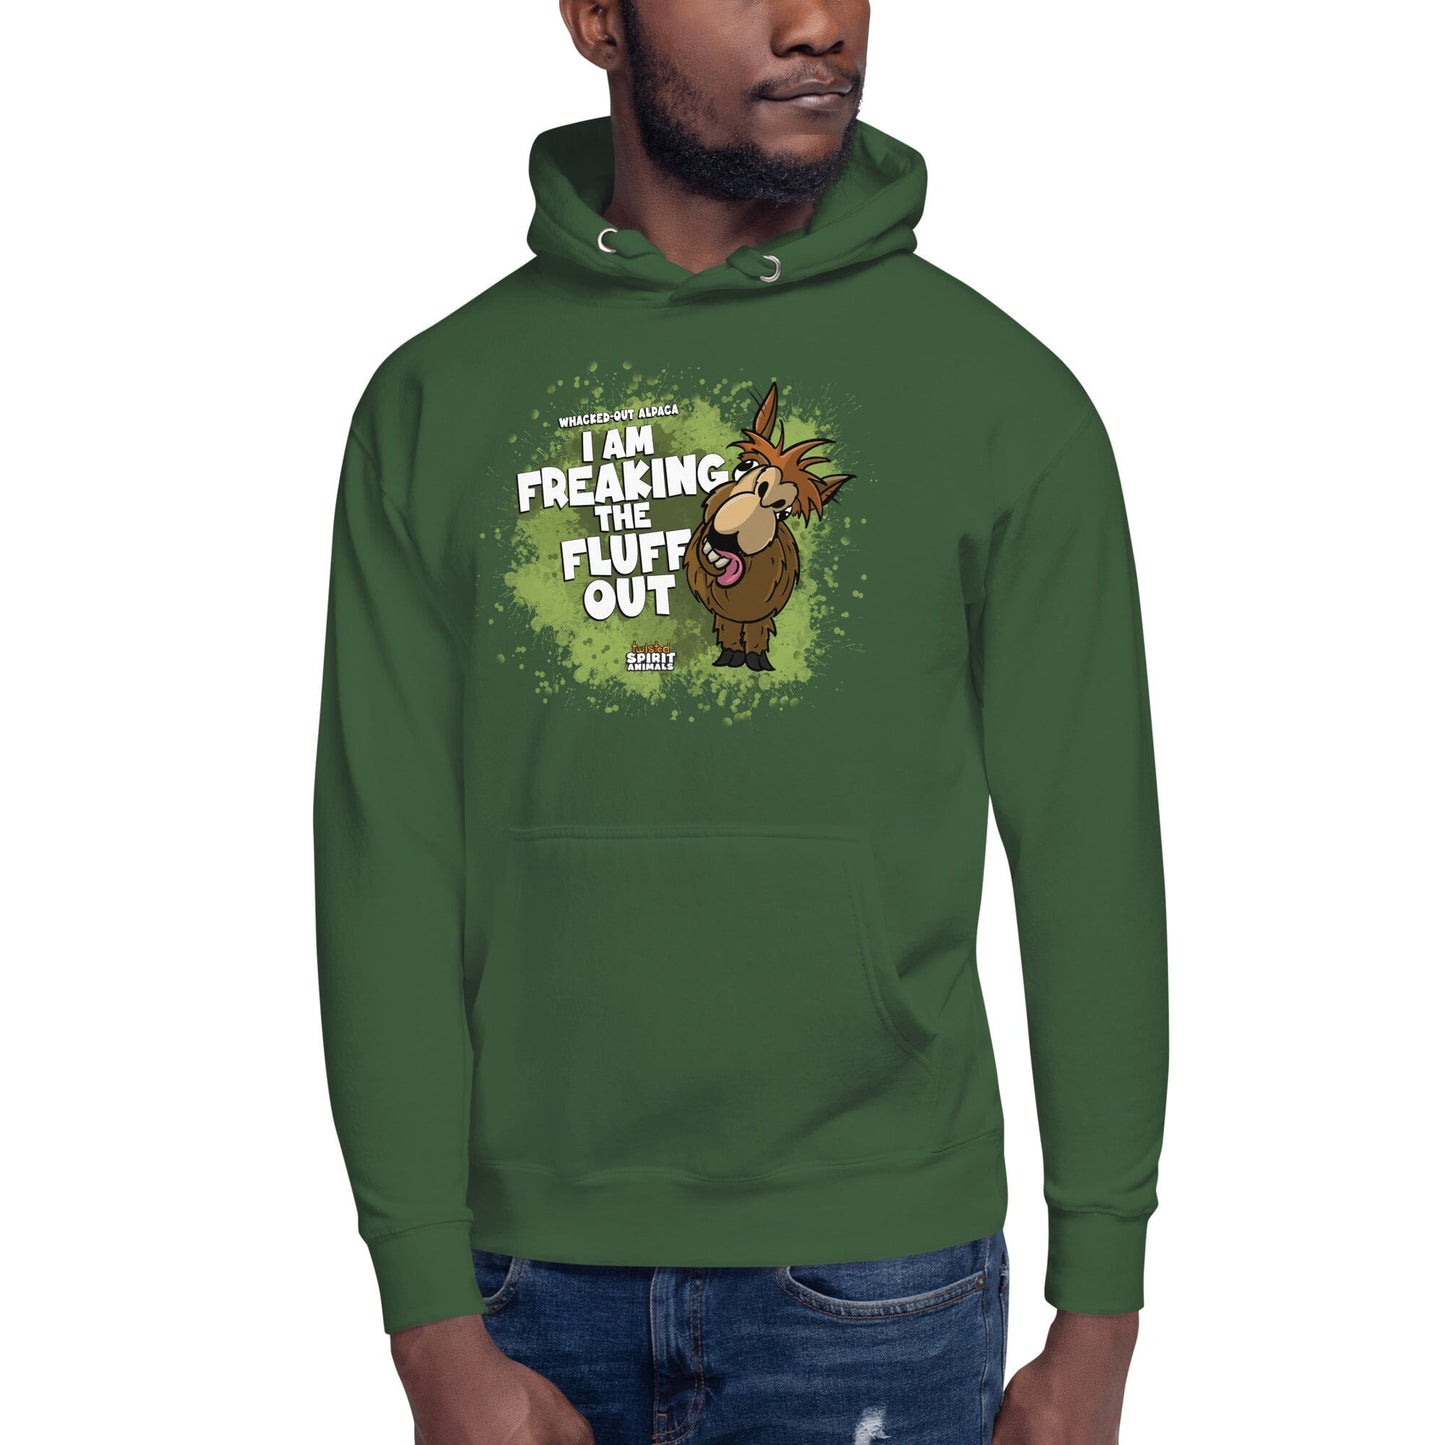 A Whacked-Out Alpaca Unisex Hoodie hoodie Danger Bear Industries Forest Green S 